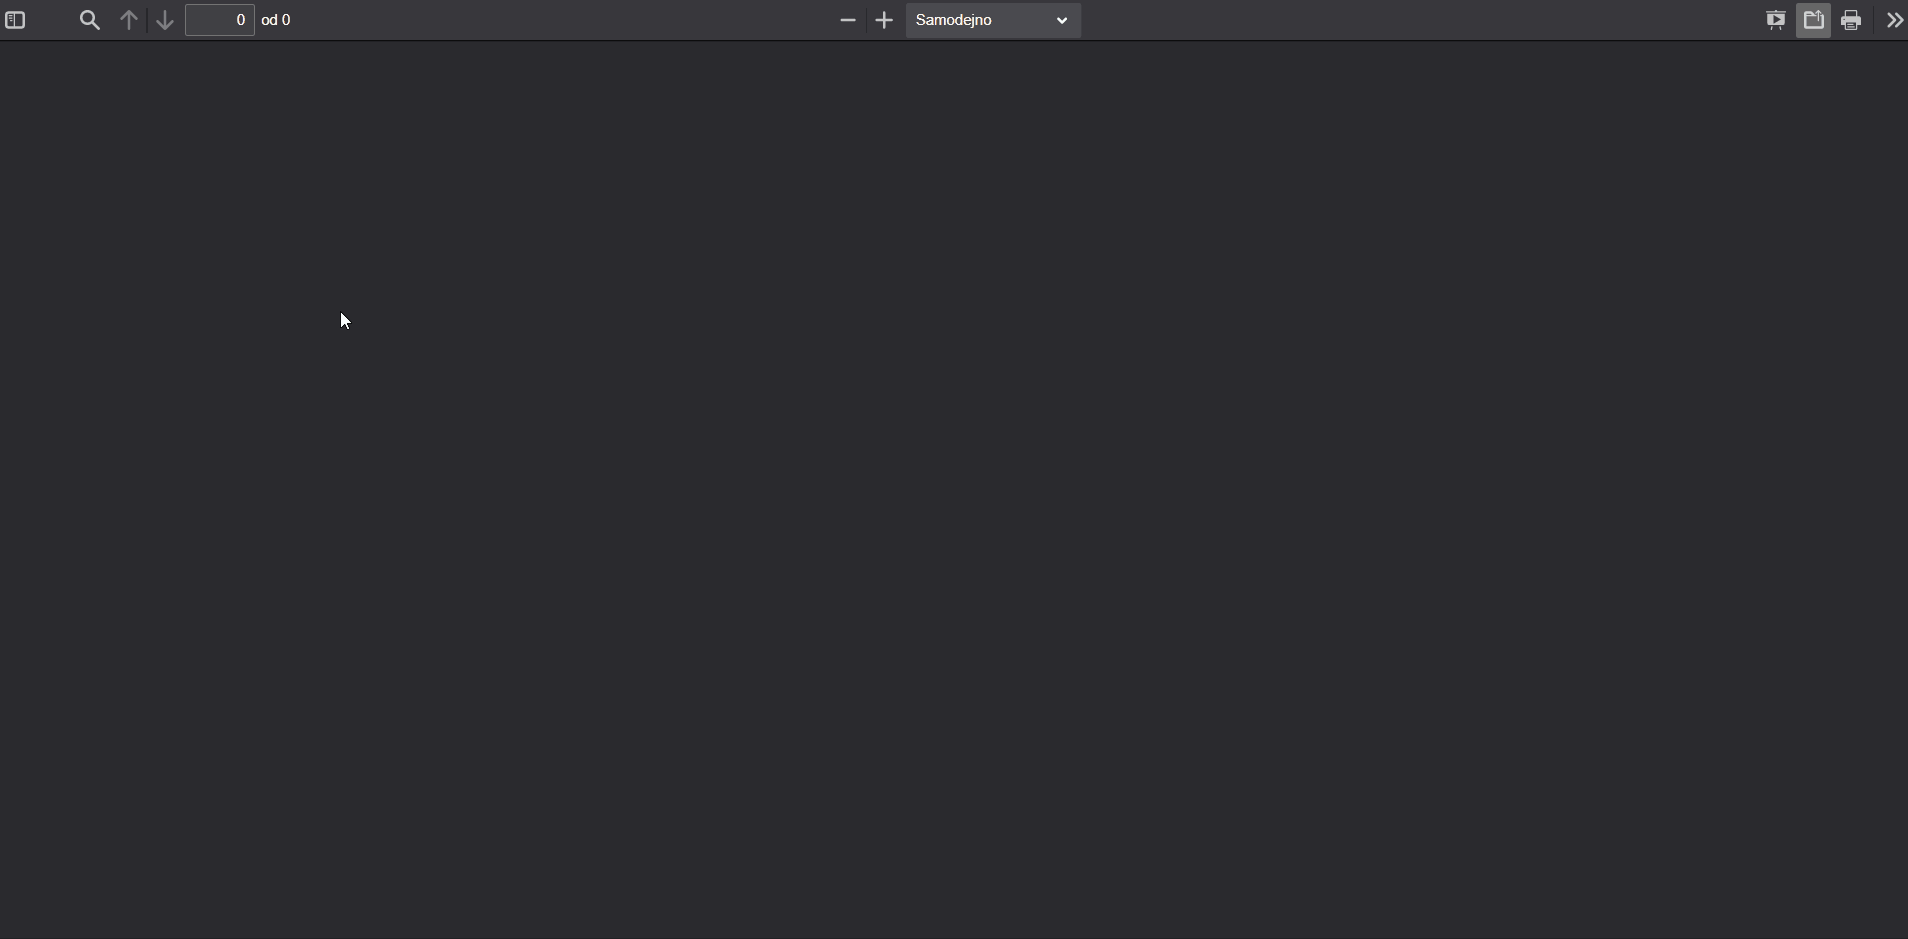 Interface if we open the file in browser